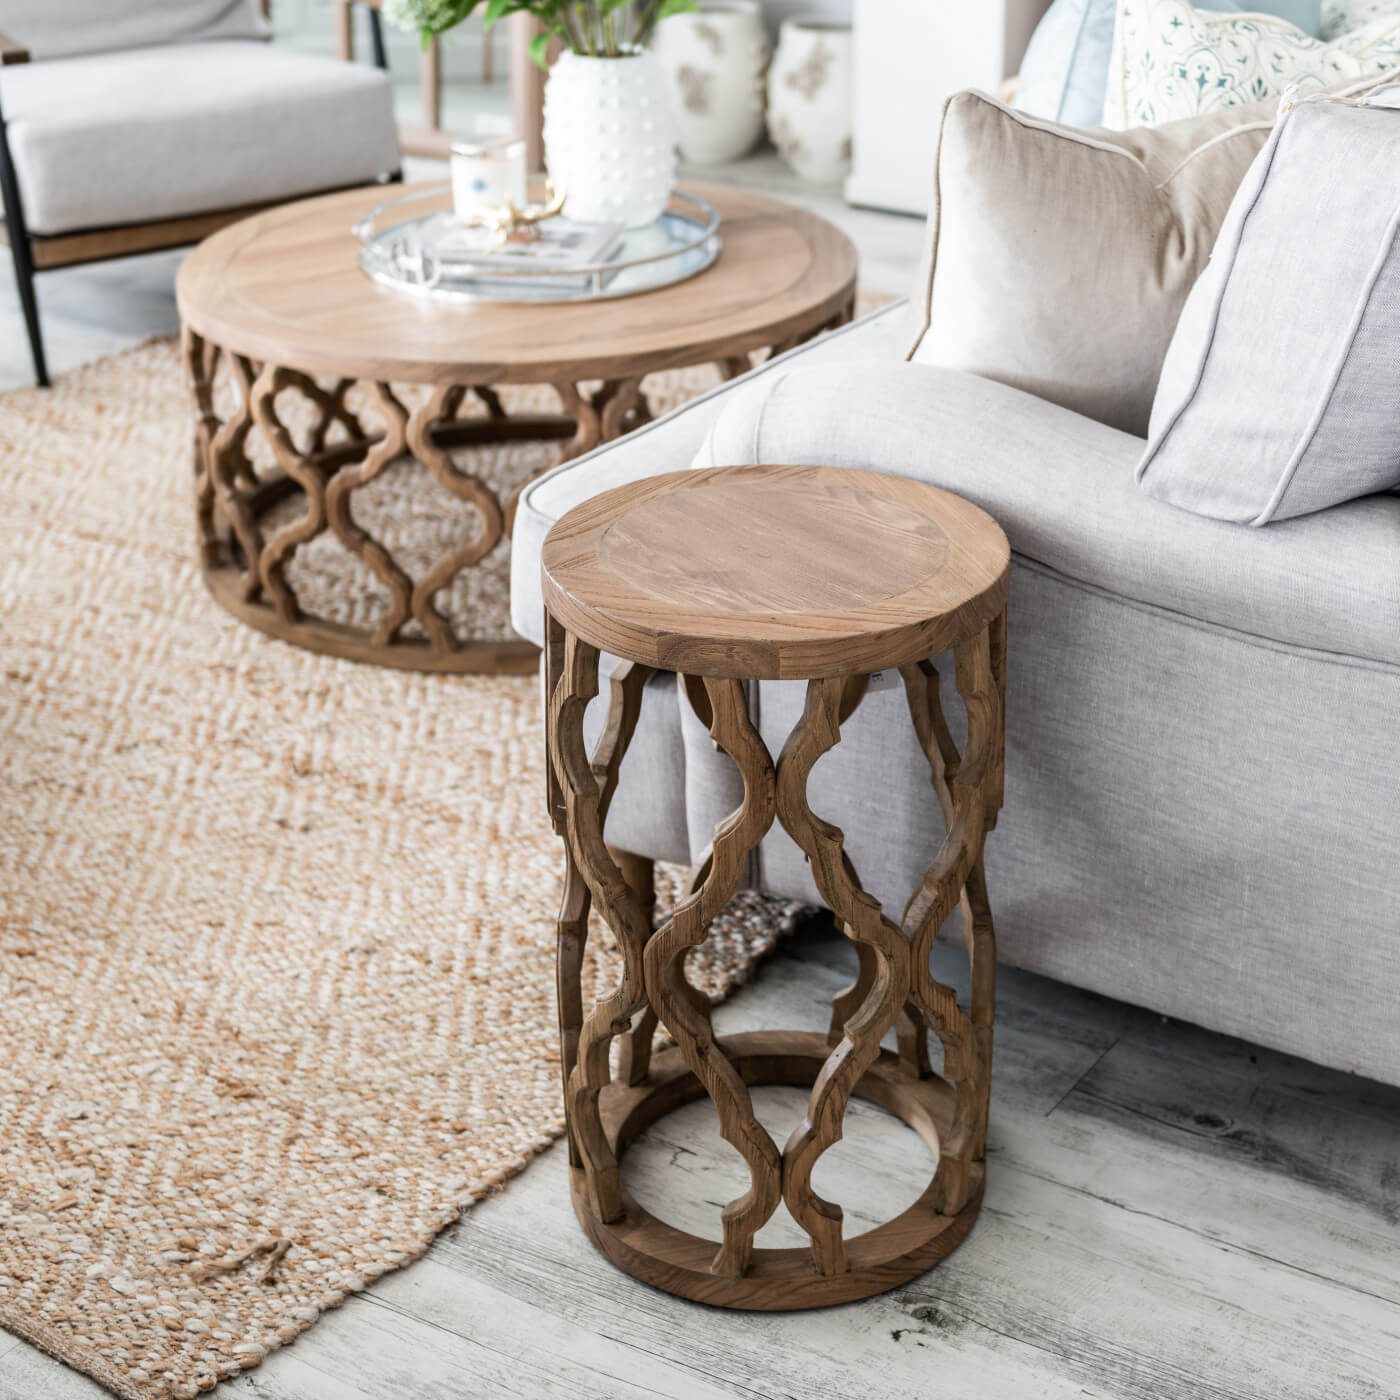 How to choose a coffee table